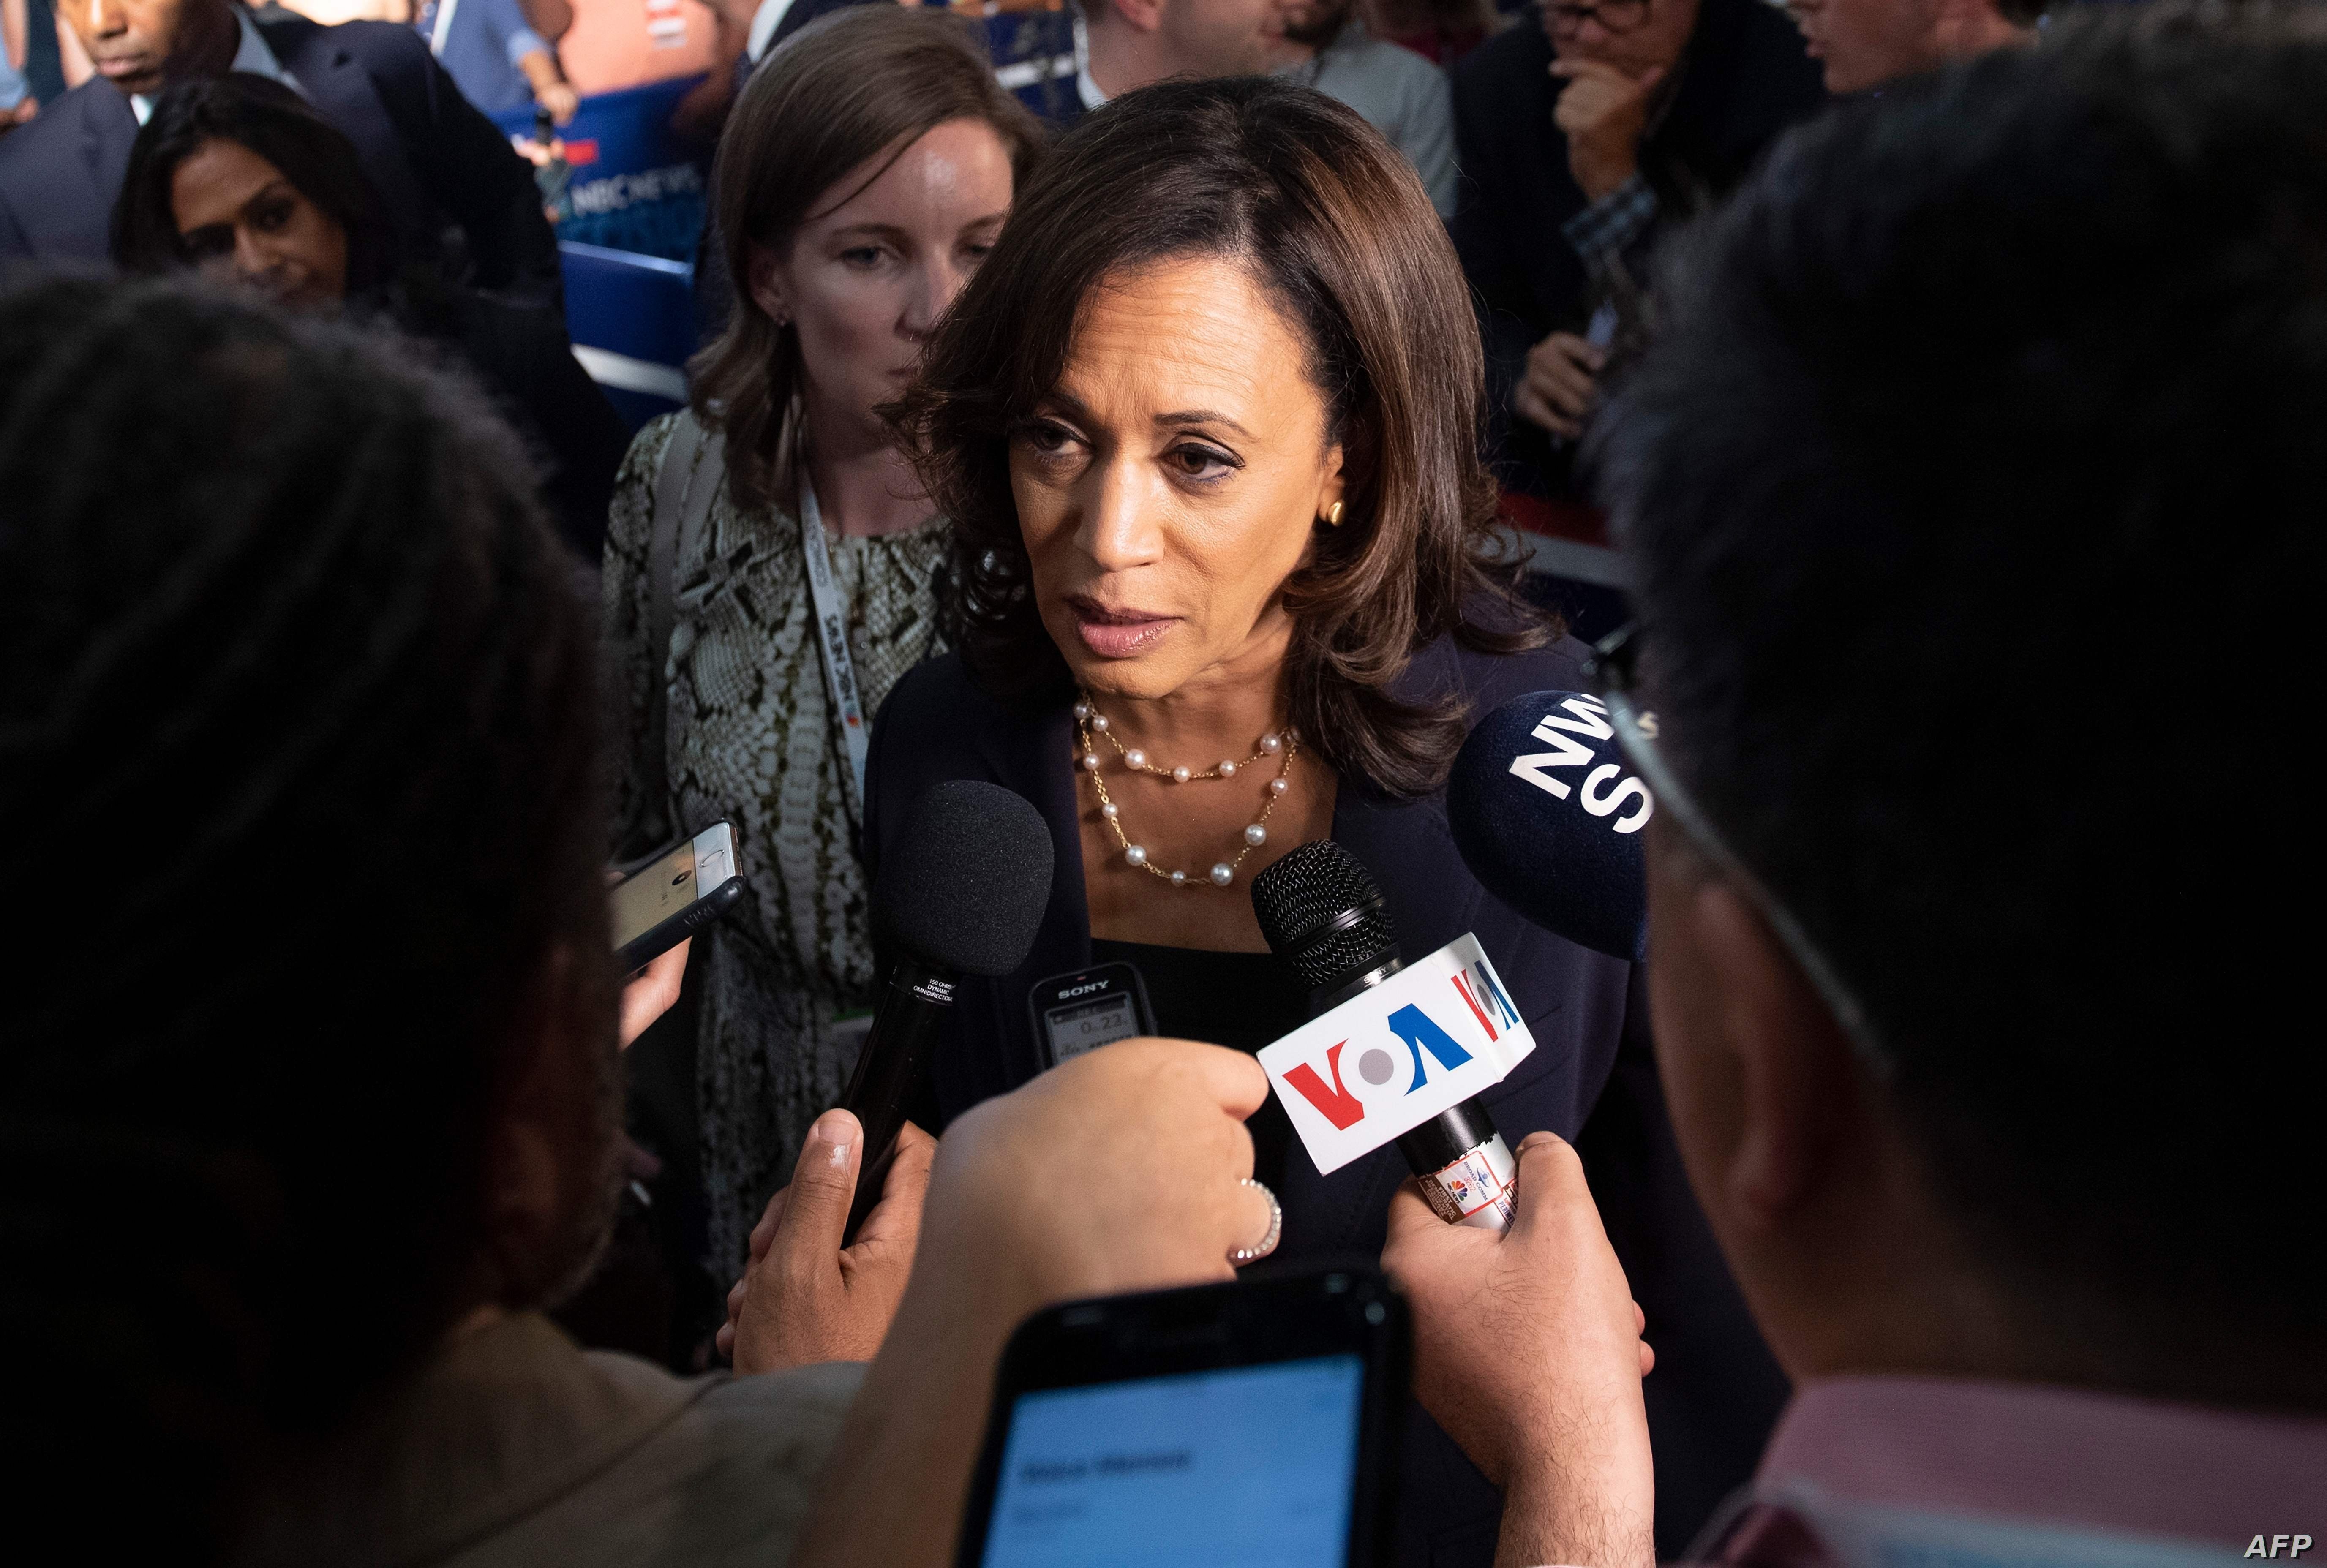 Democratic presidential hopeful US Senator for California Kamala Harris speaks to the press in the Spin Room after the second Democratic primary debate of the 2020 presidential campaign season hosted by NBC News at the Adrienne Arsht Center for the…